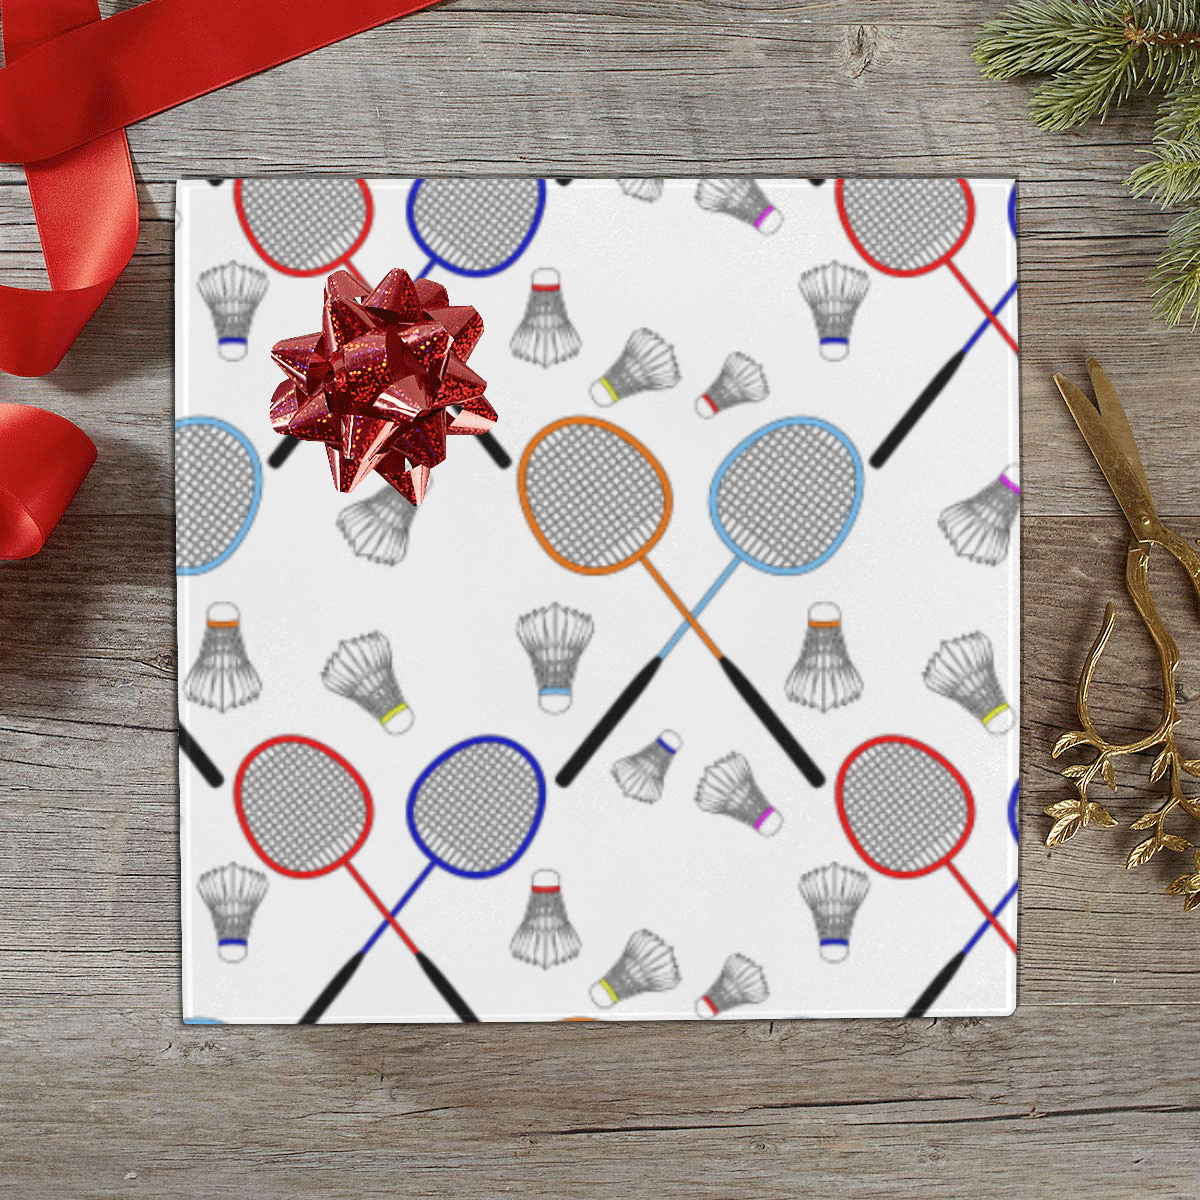 Badminton Rackets and Shuttlecocks Pattern Gift Wrapping Paper 58"x 23" (5 Rolls)